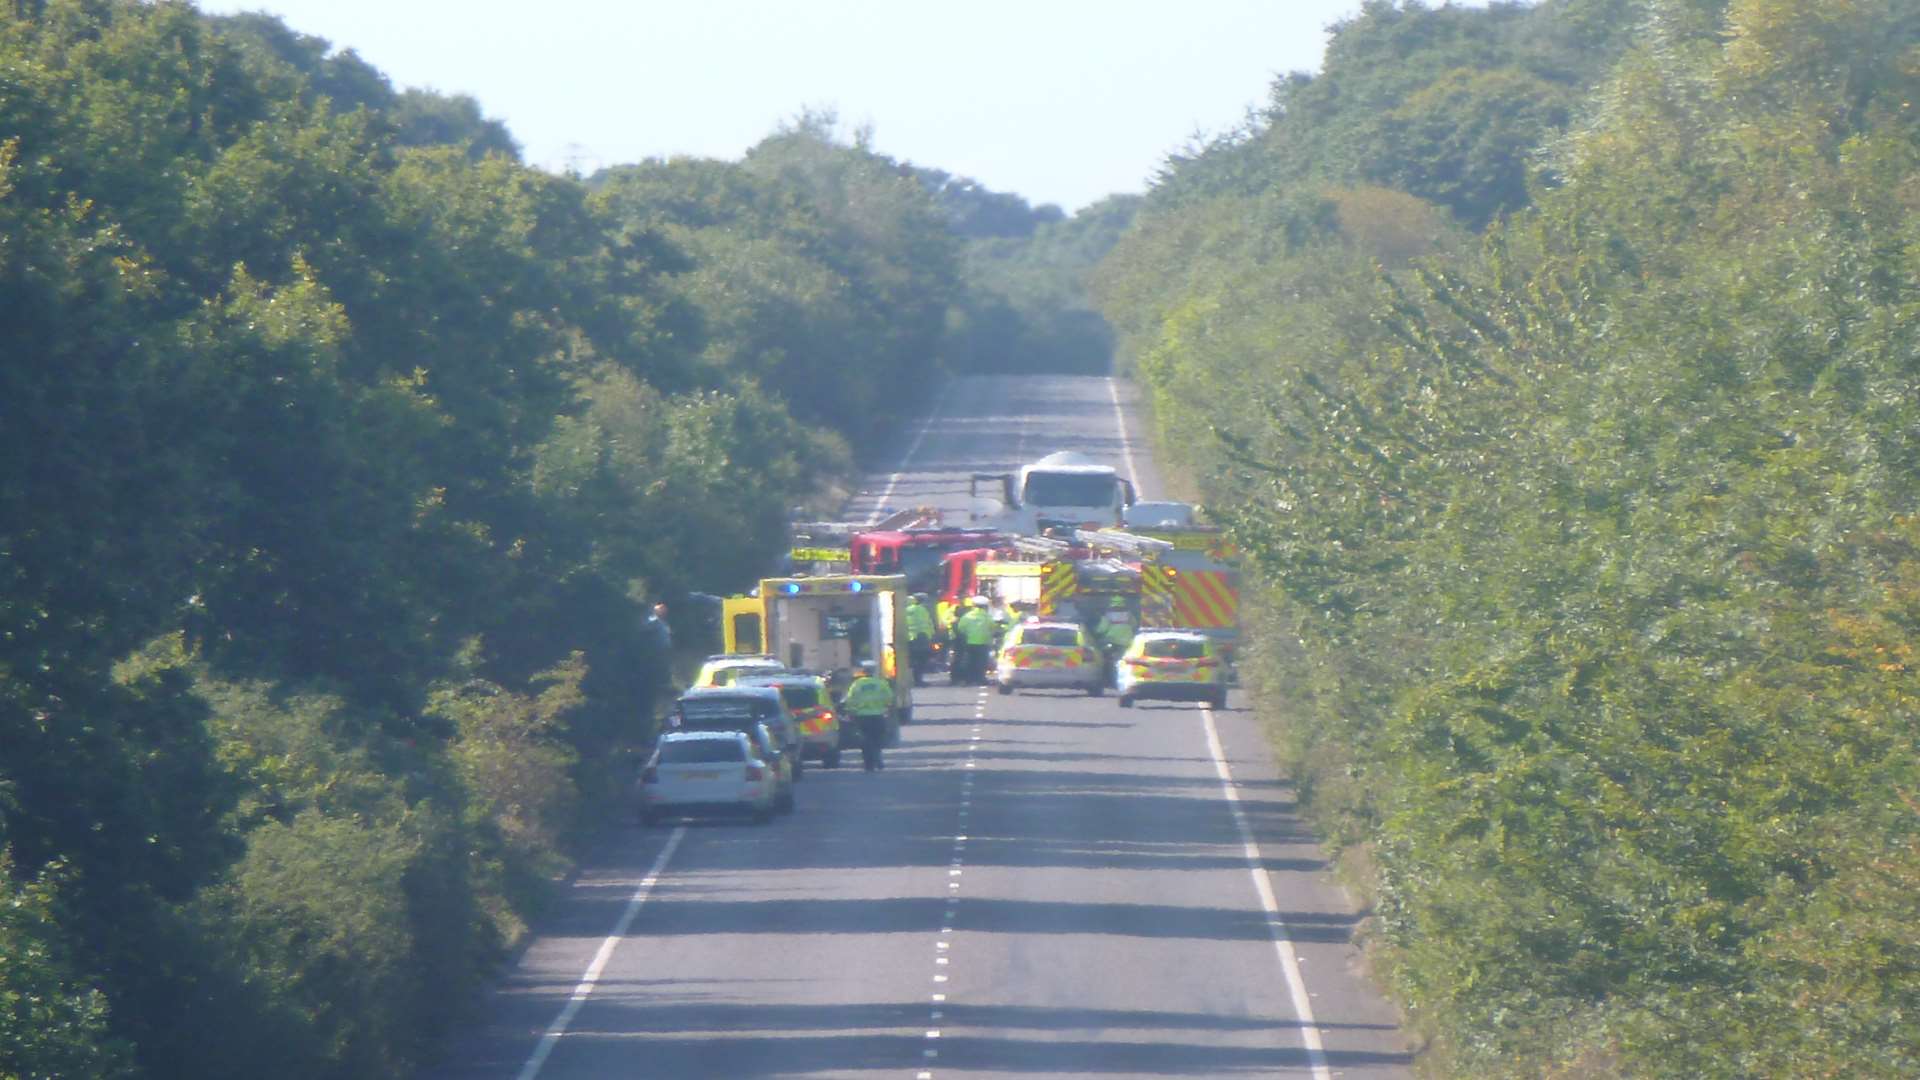 All three emergency services were called to the incident on the Brenzett road